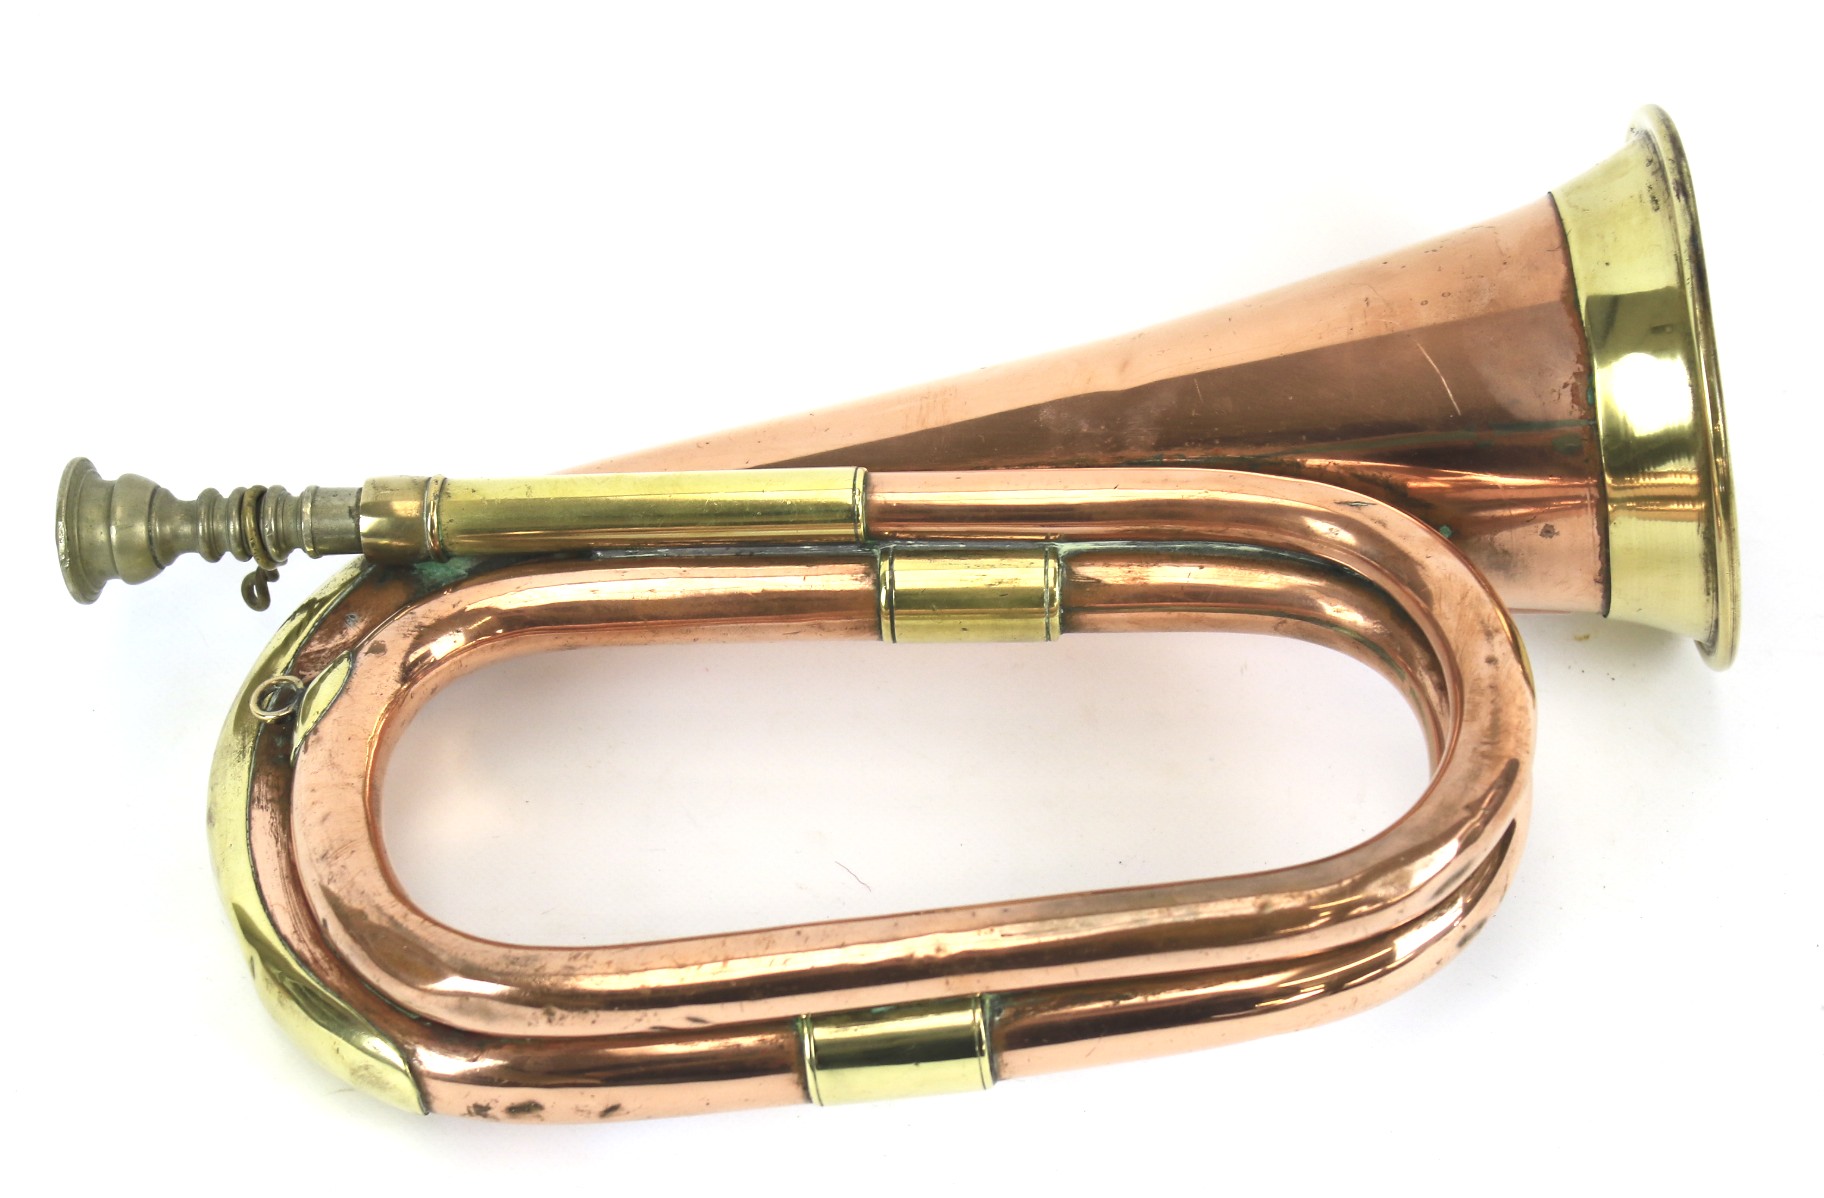 A vintage brass and copper bugle.